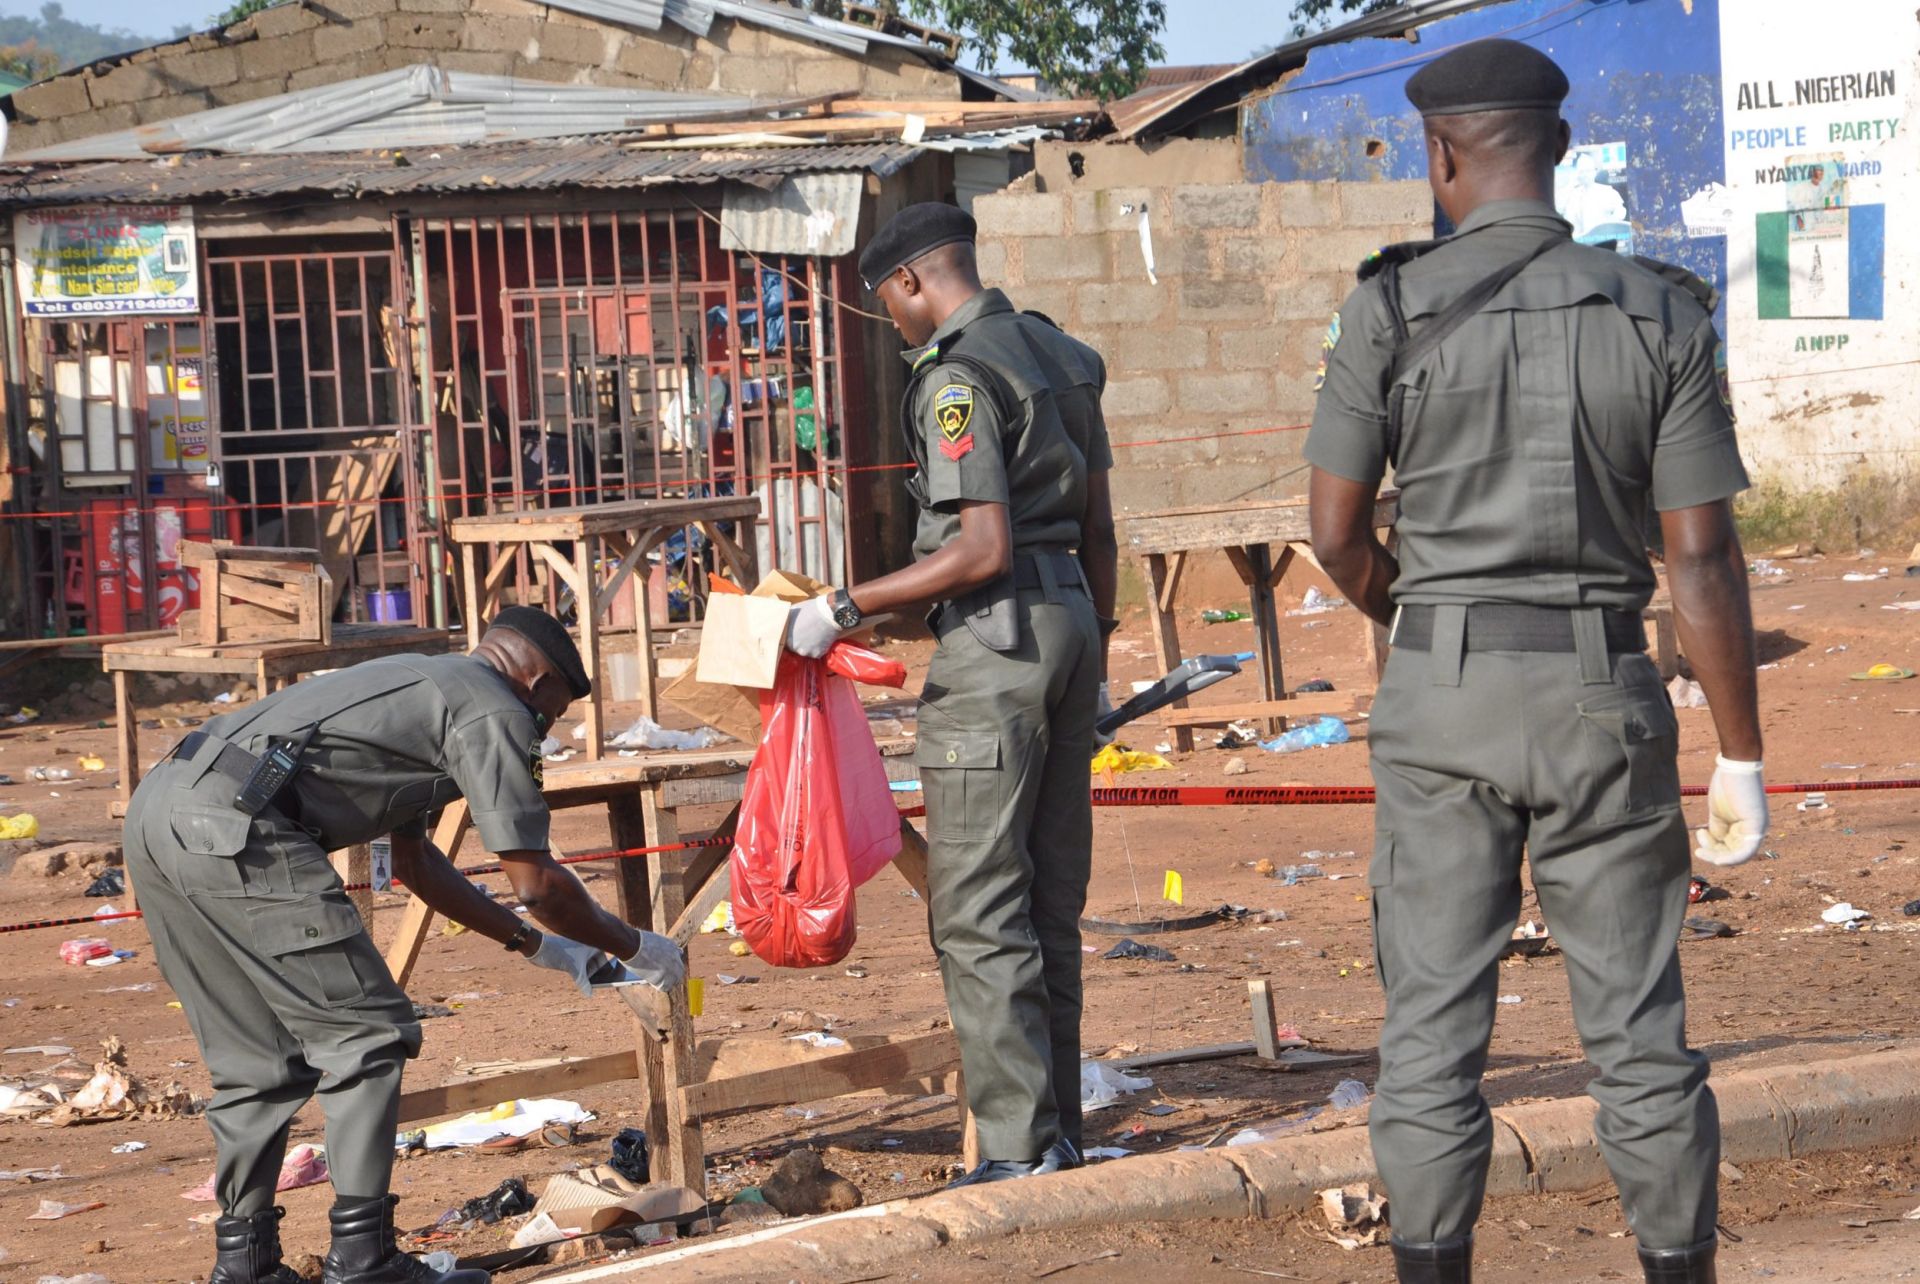 epa04961613 A photograph made avaiable on 03 October 2015 showing Nigeria security personnel searching the scene of Nyanya bomb blast in Abuja, Nigeria, 02 October 2015. Multiple explosions that rocked the outskirts of Nigeria's federal capital Abuja on Friday night have left at least 15 people dead, an official involved in the rescue operations said.  EPA/STRINGER